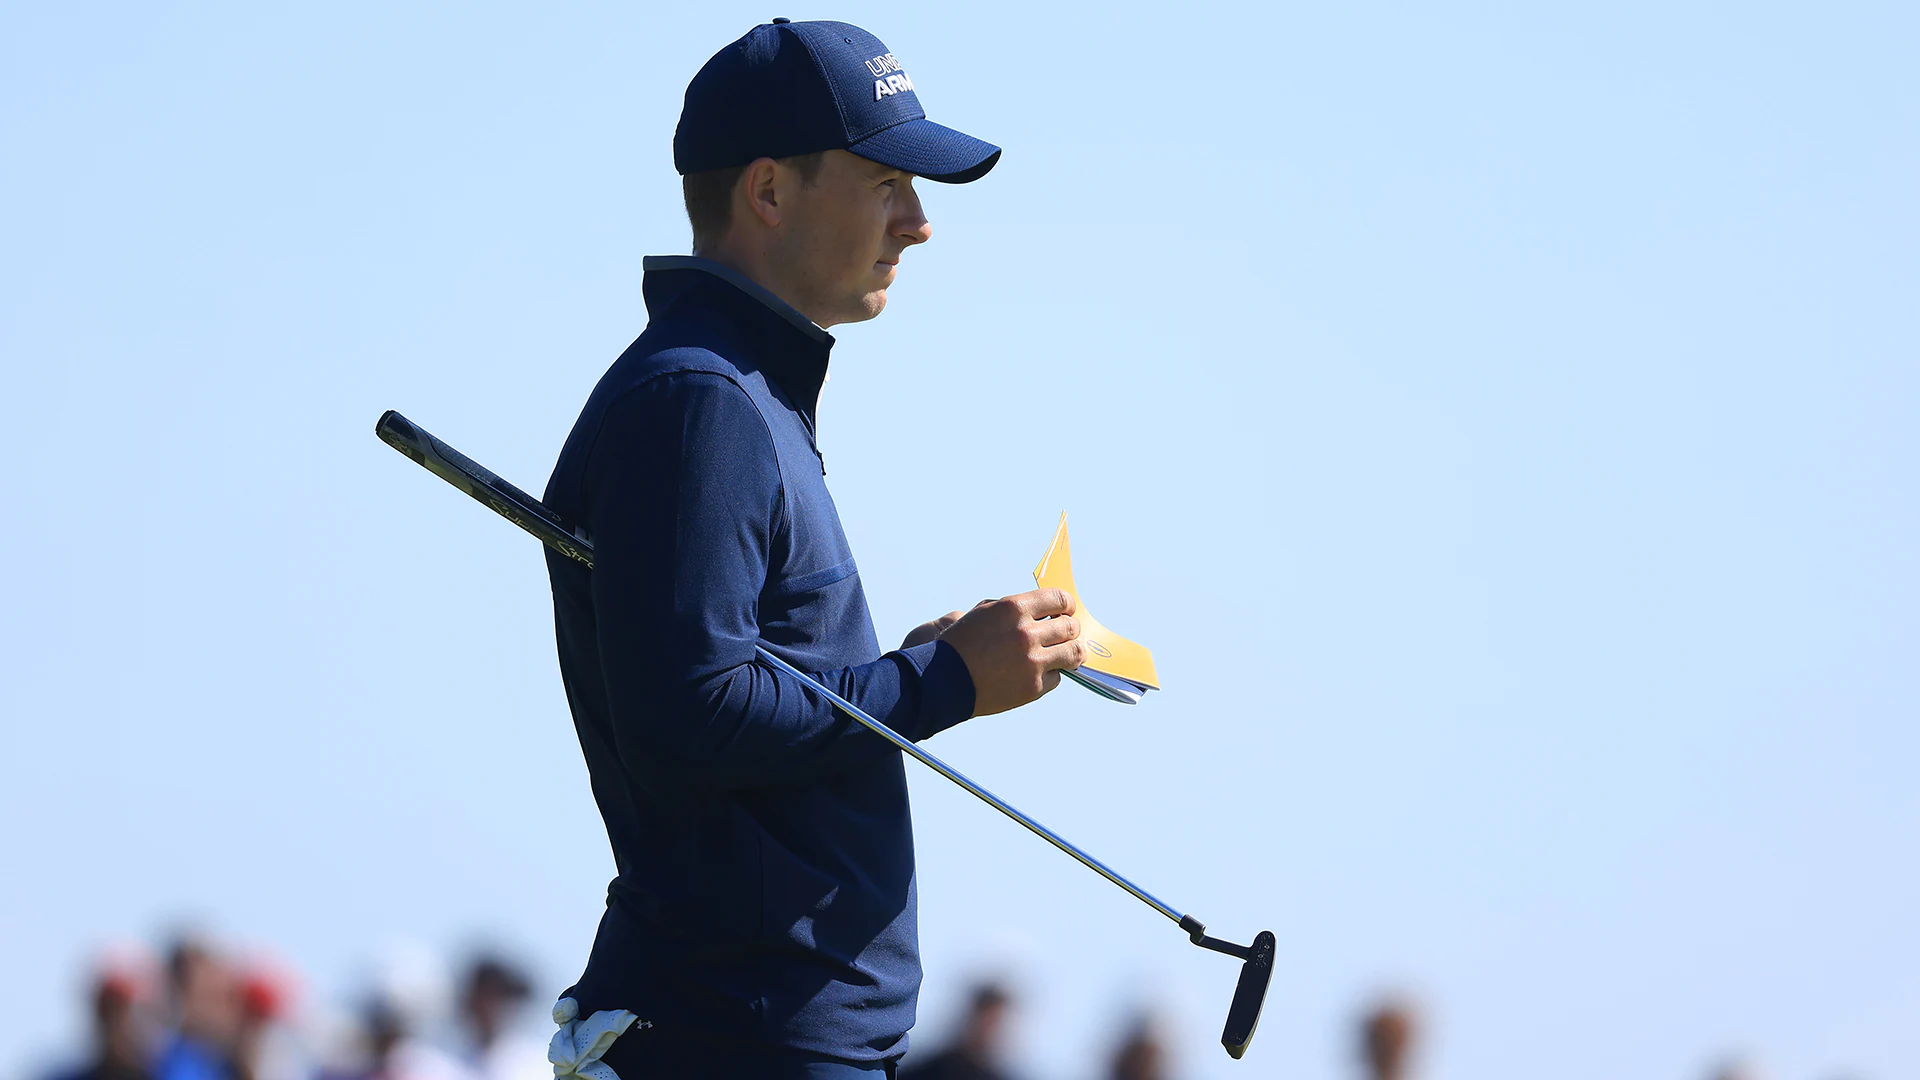 British Open 2021: Highlights from Jordan Spieth’s opening round at Royal St. George’s